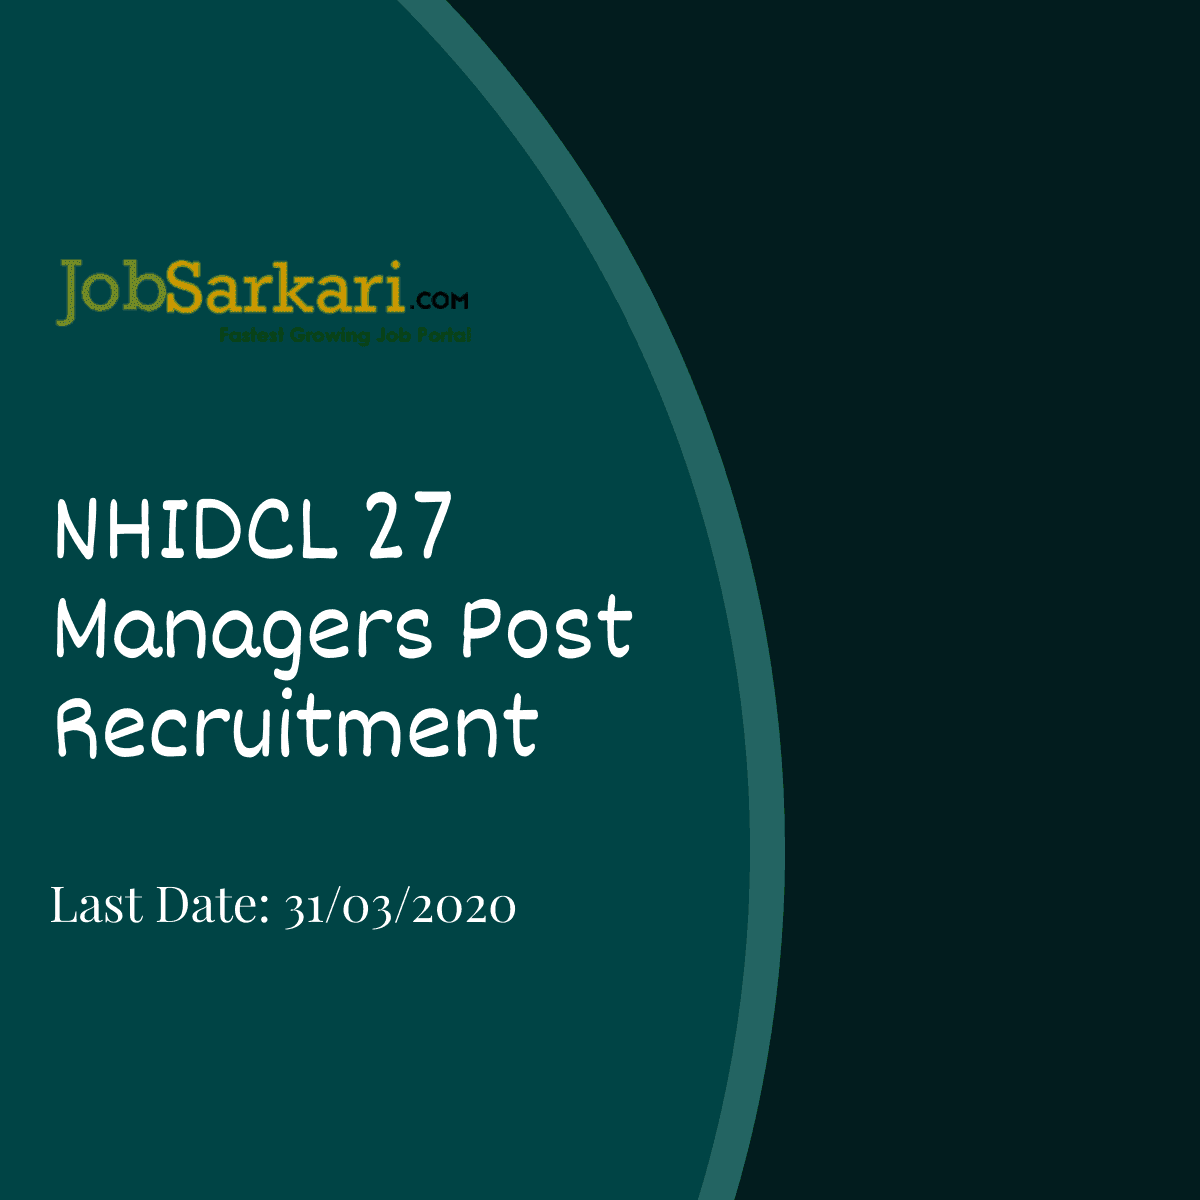 NHIDCL Recruitment 2020 For Managers Post 1